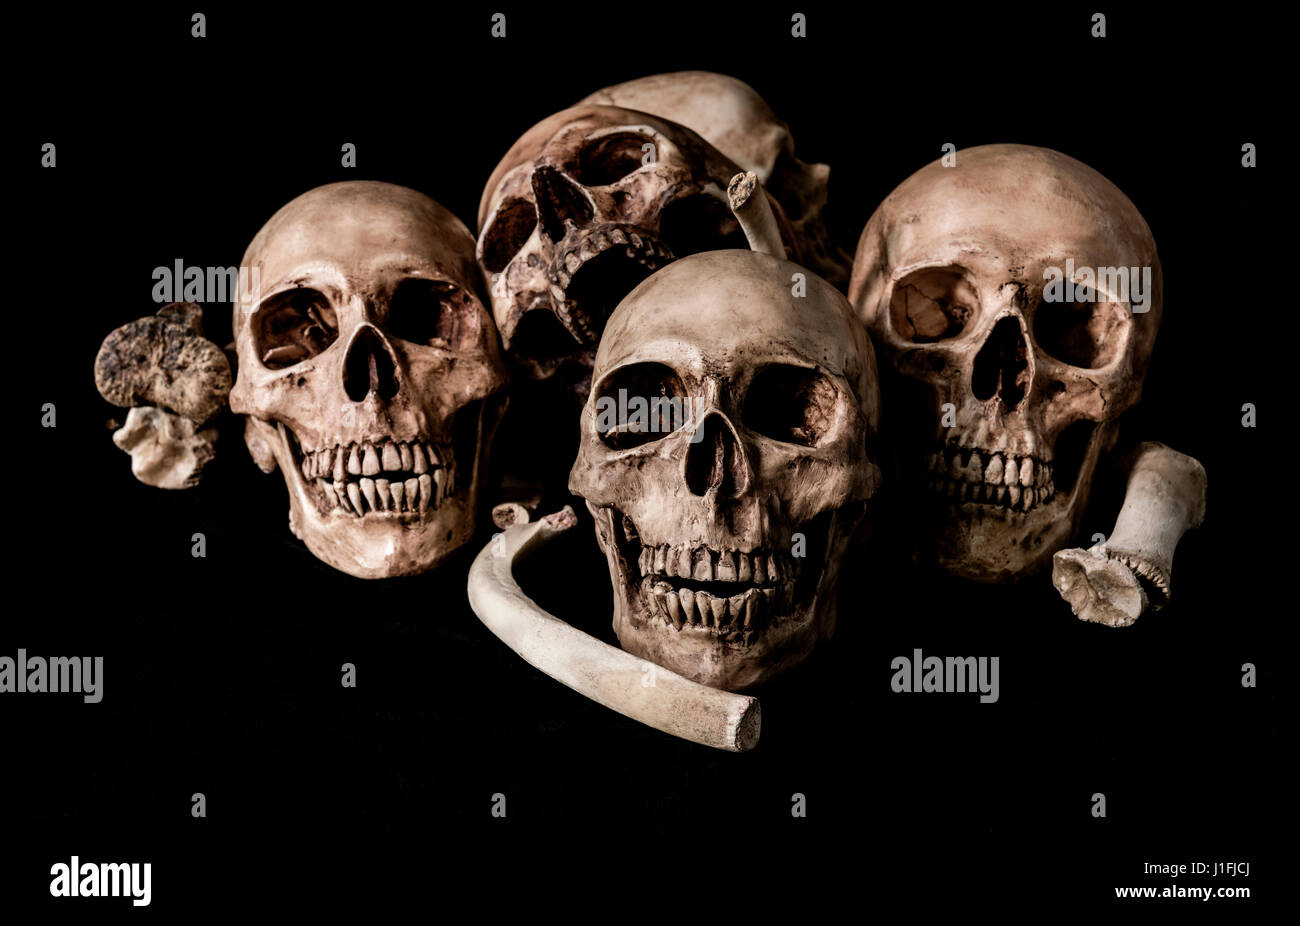 Still life human skull and bones, genocides concept and horror darkness Stock Photo